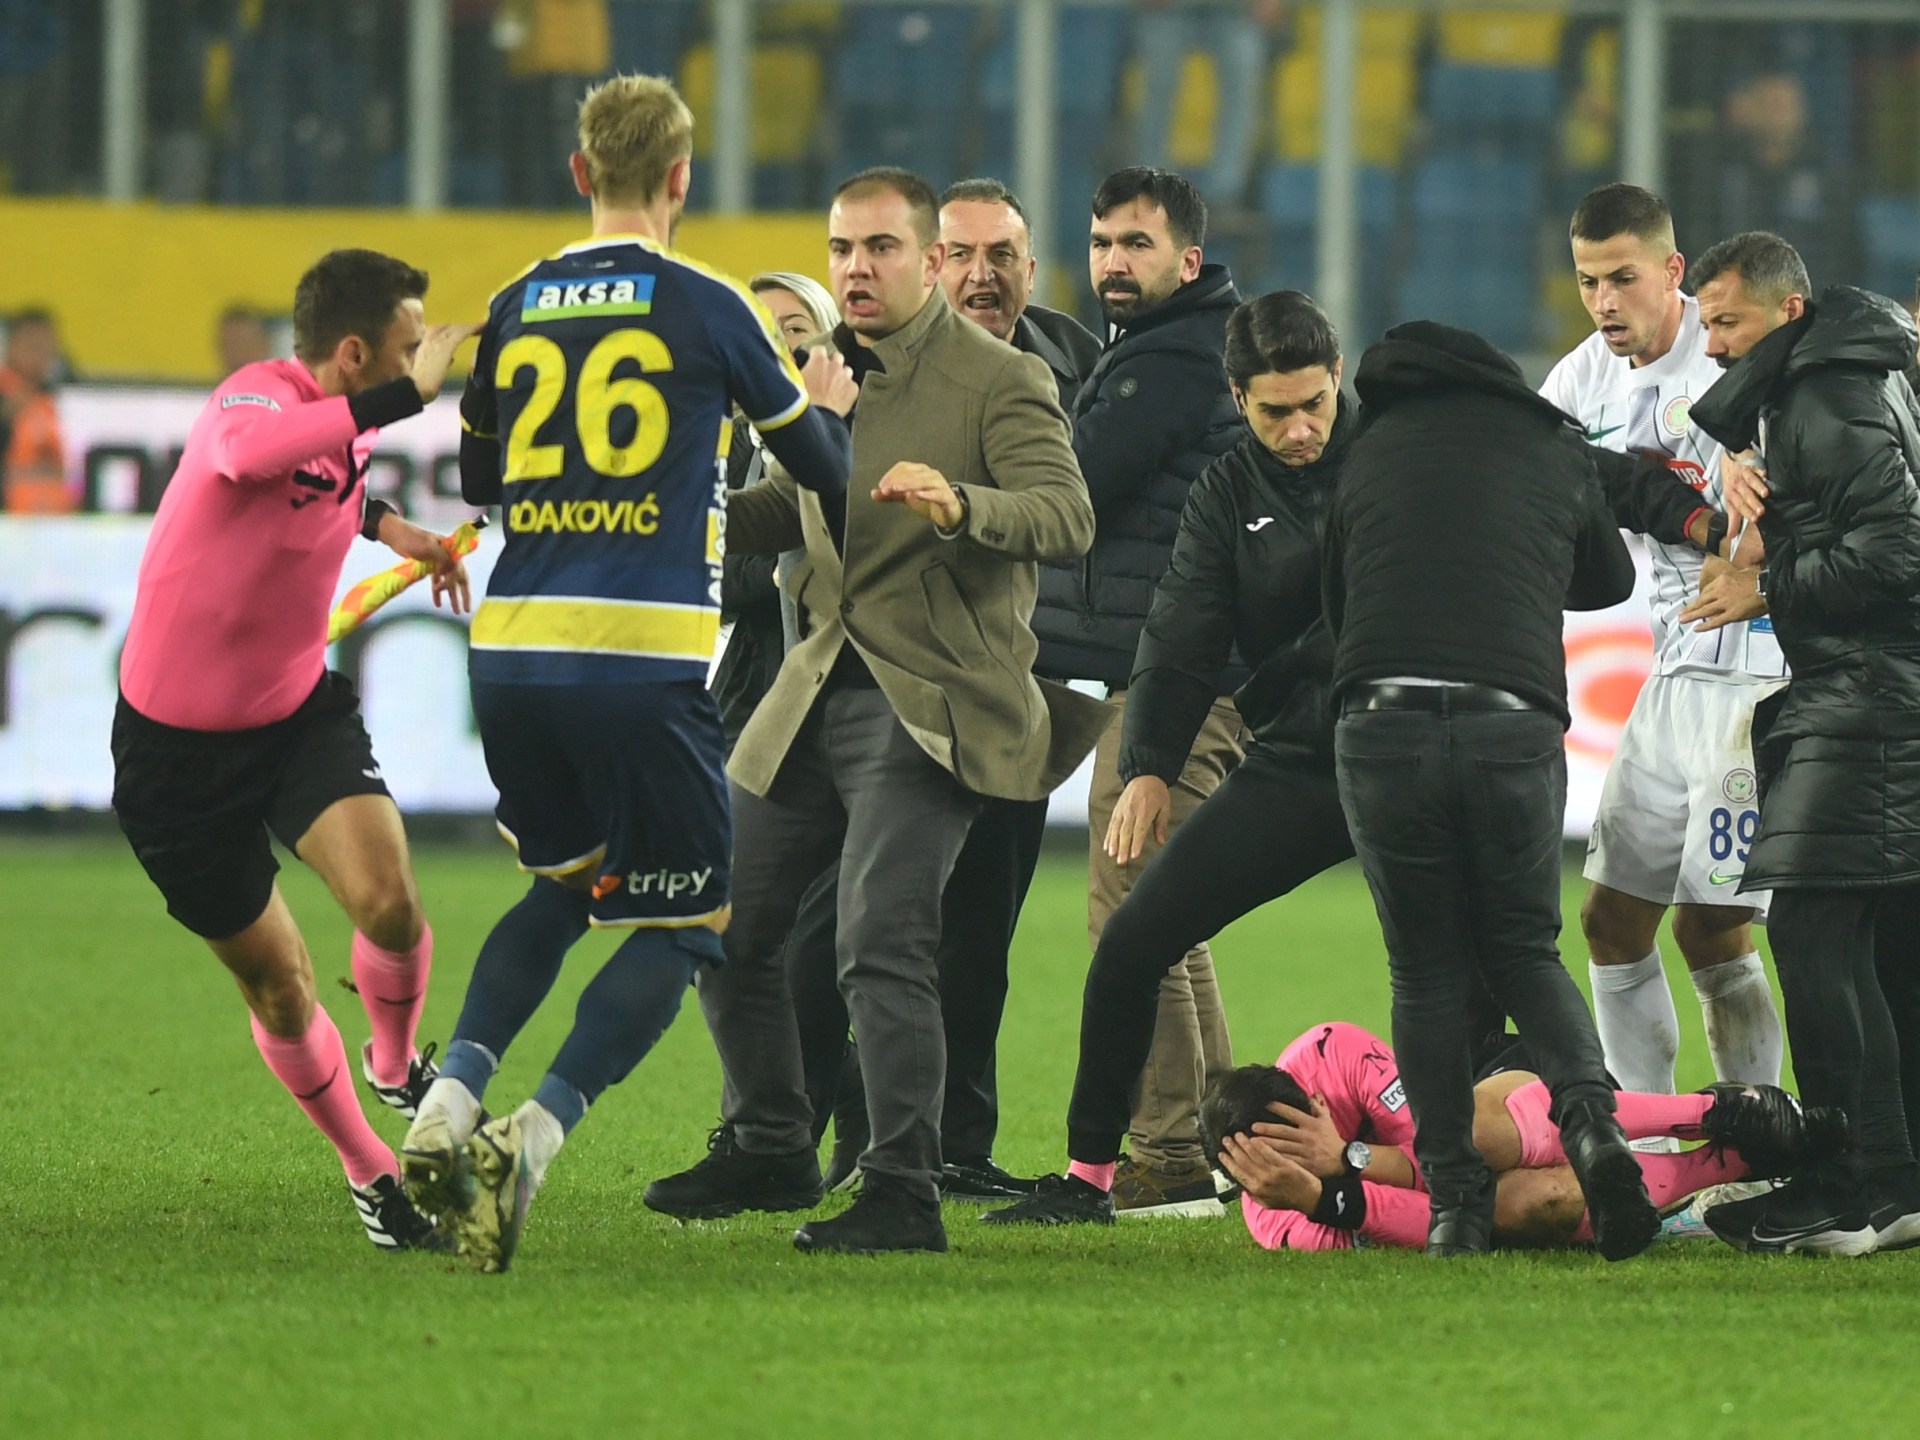 ‘Night of shame’: Turkey suspends all football after referee is punched